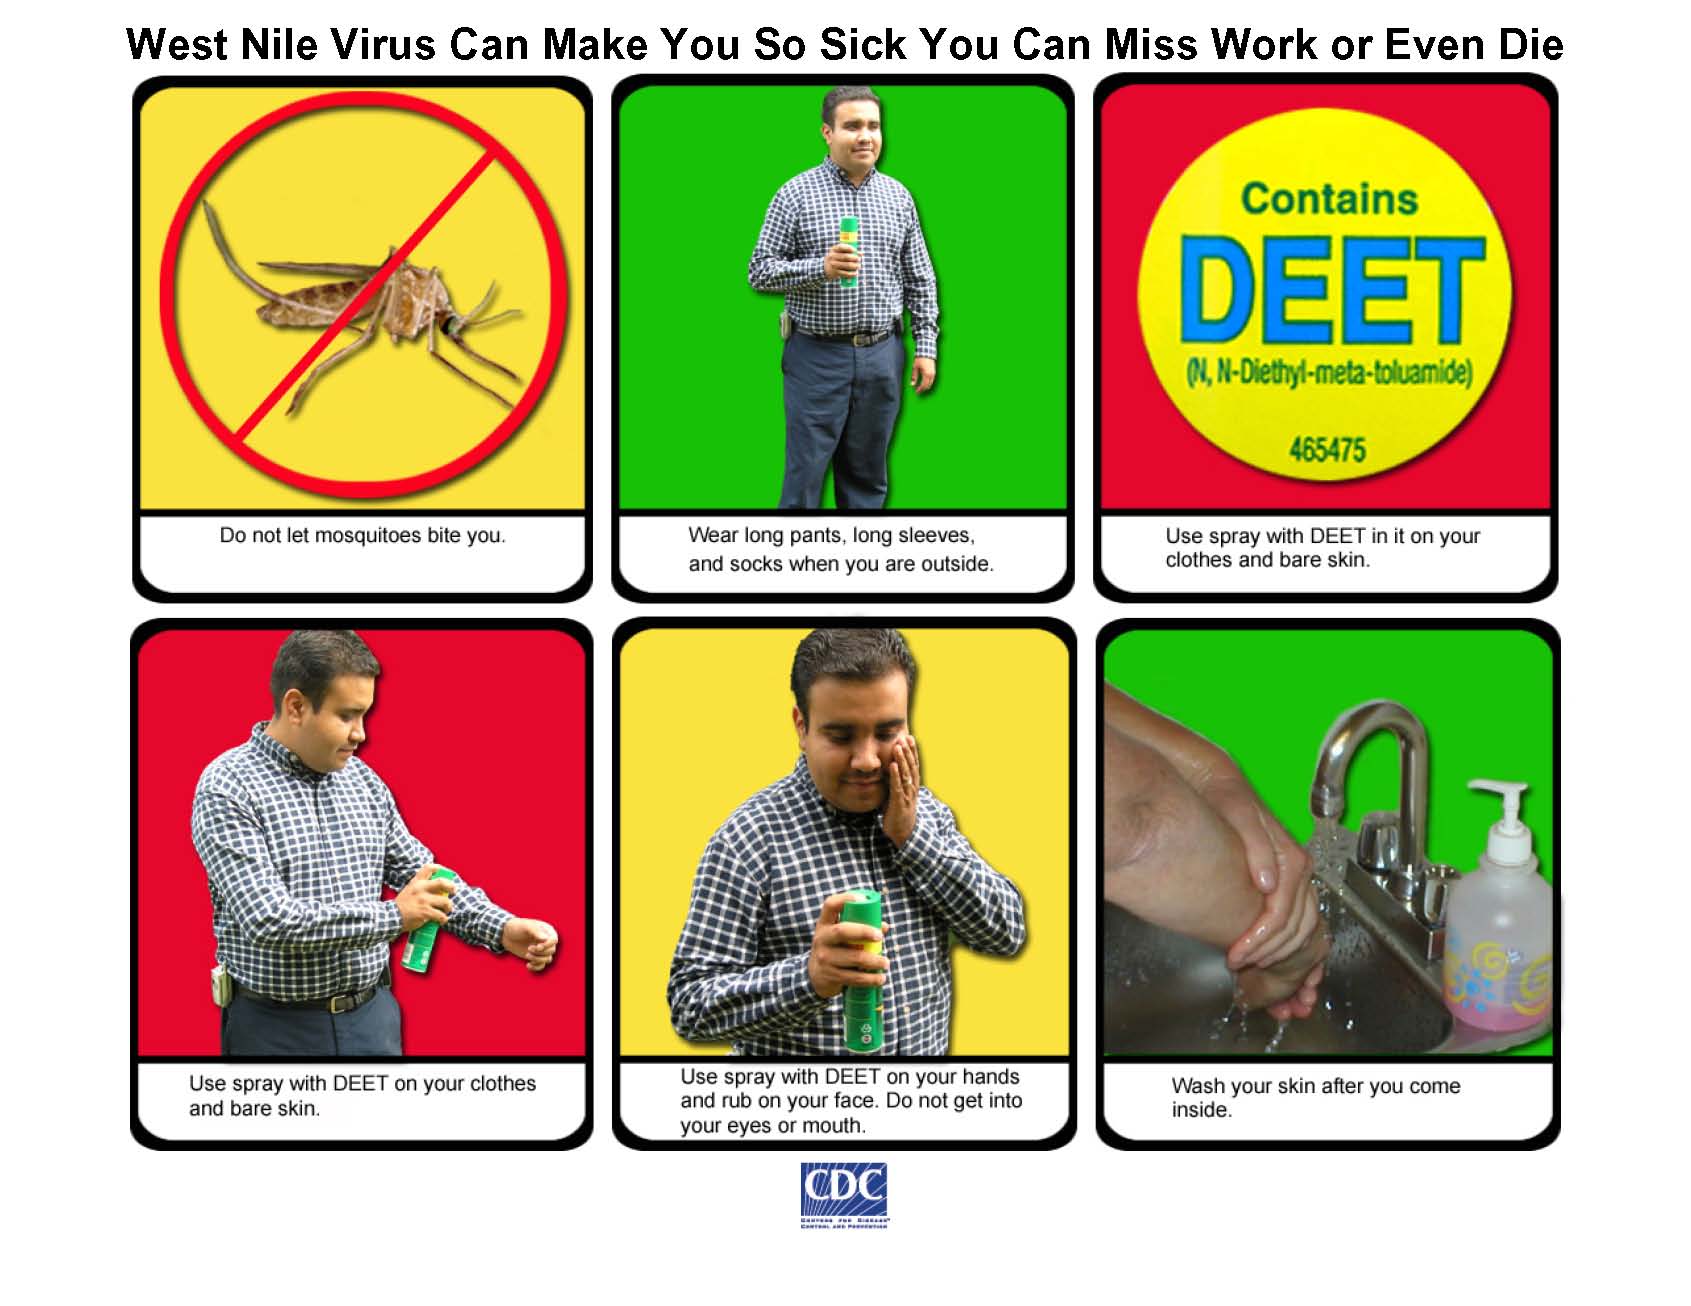 West Nile Virus Can Make You So Sick You Can Miss Work or Even Die Poster